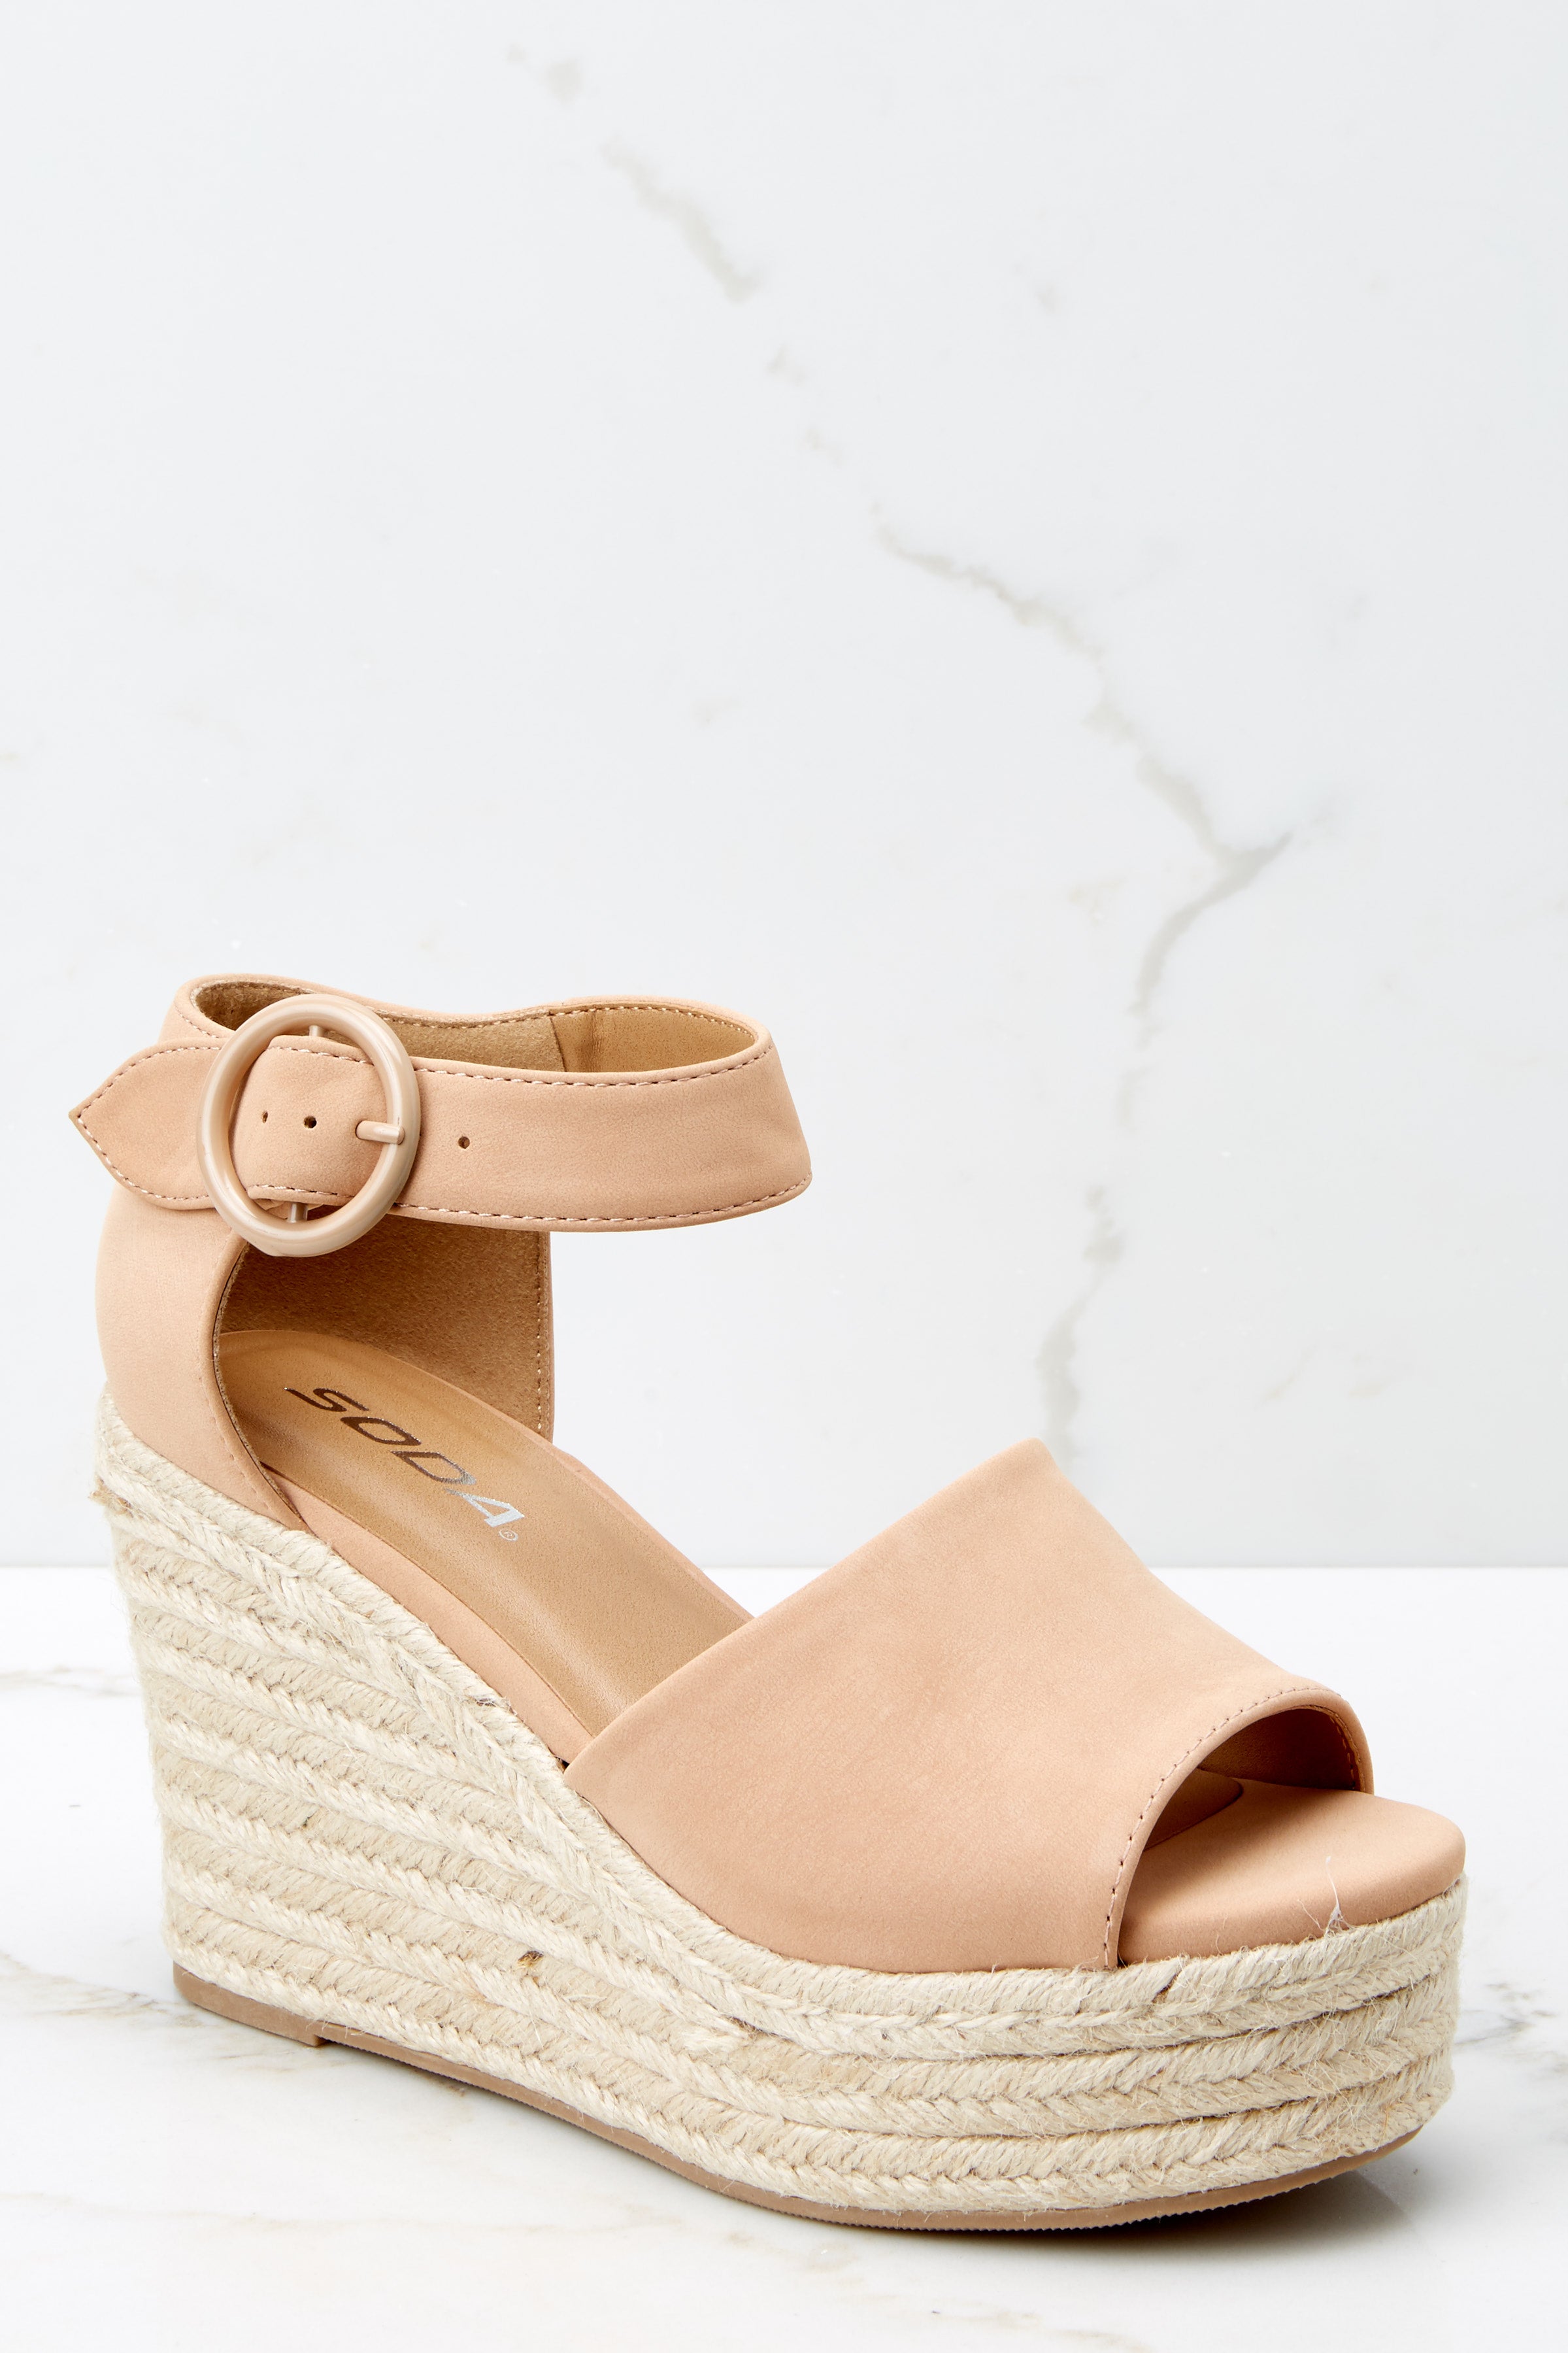 nude color wedges